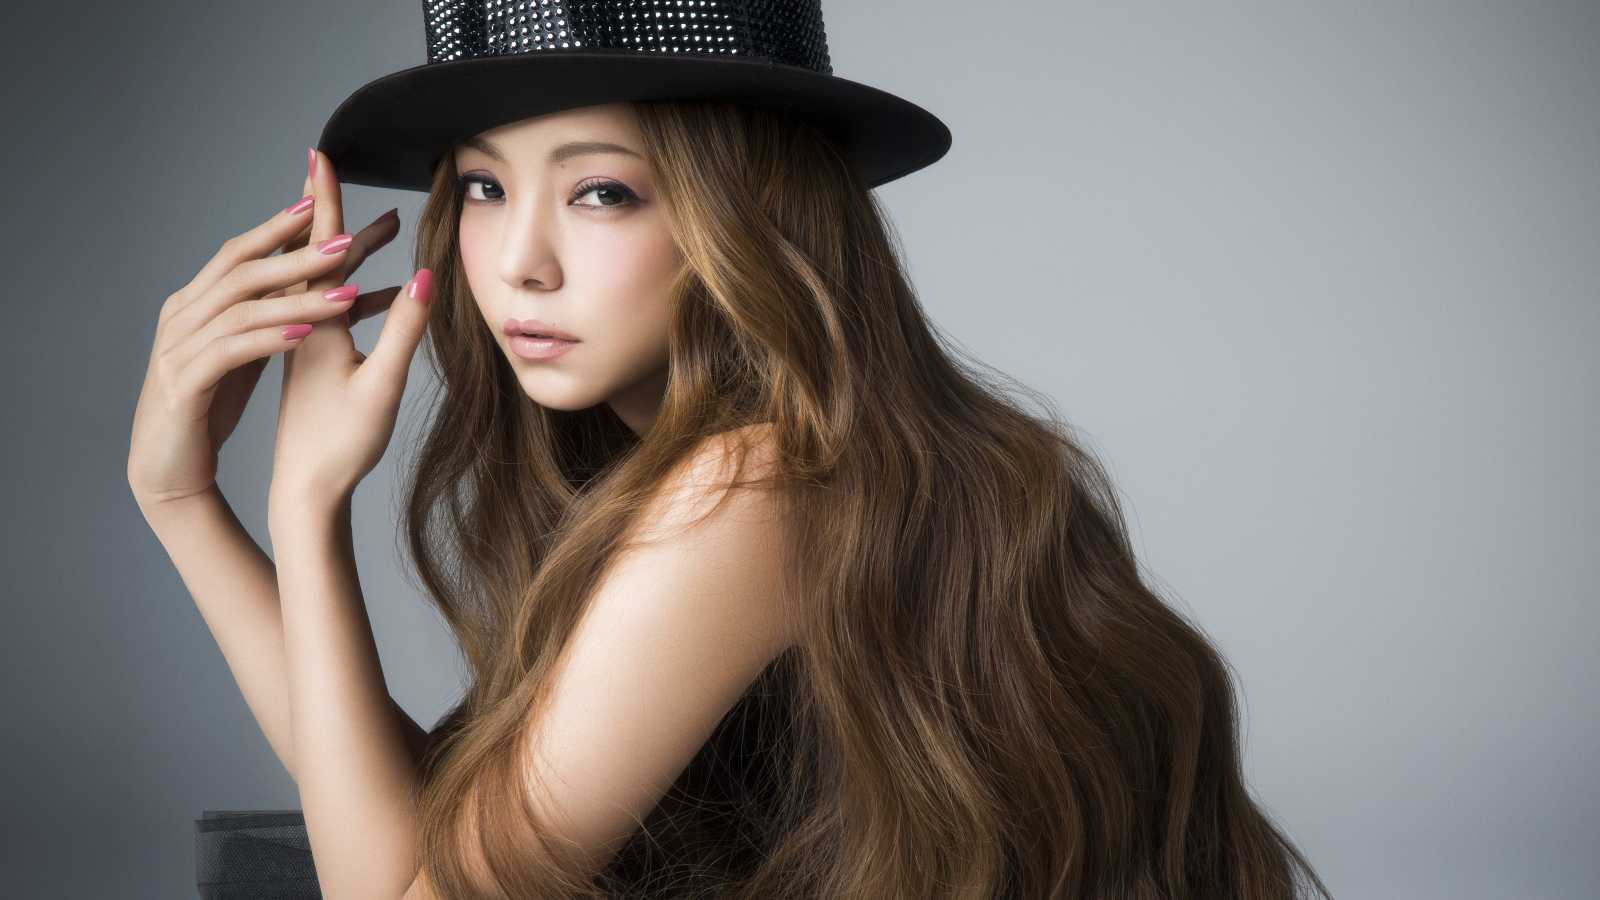 Amuro Namie © 2015 Dimension Point All rights reserved.